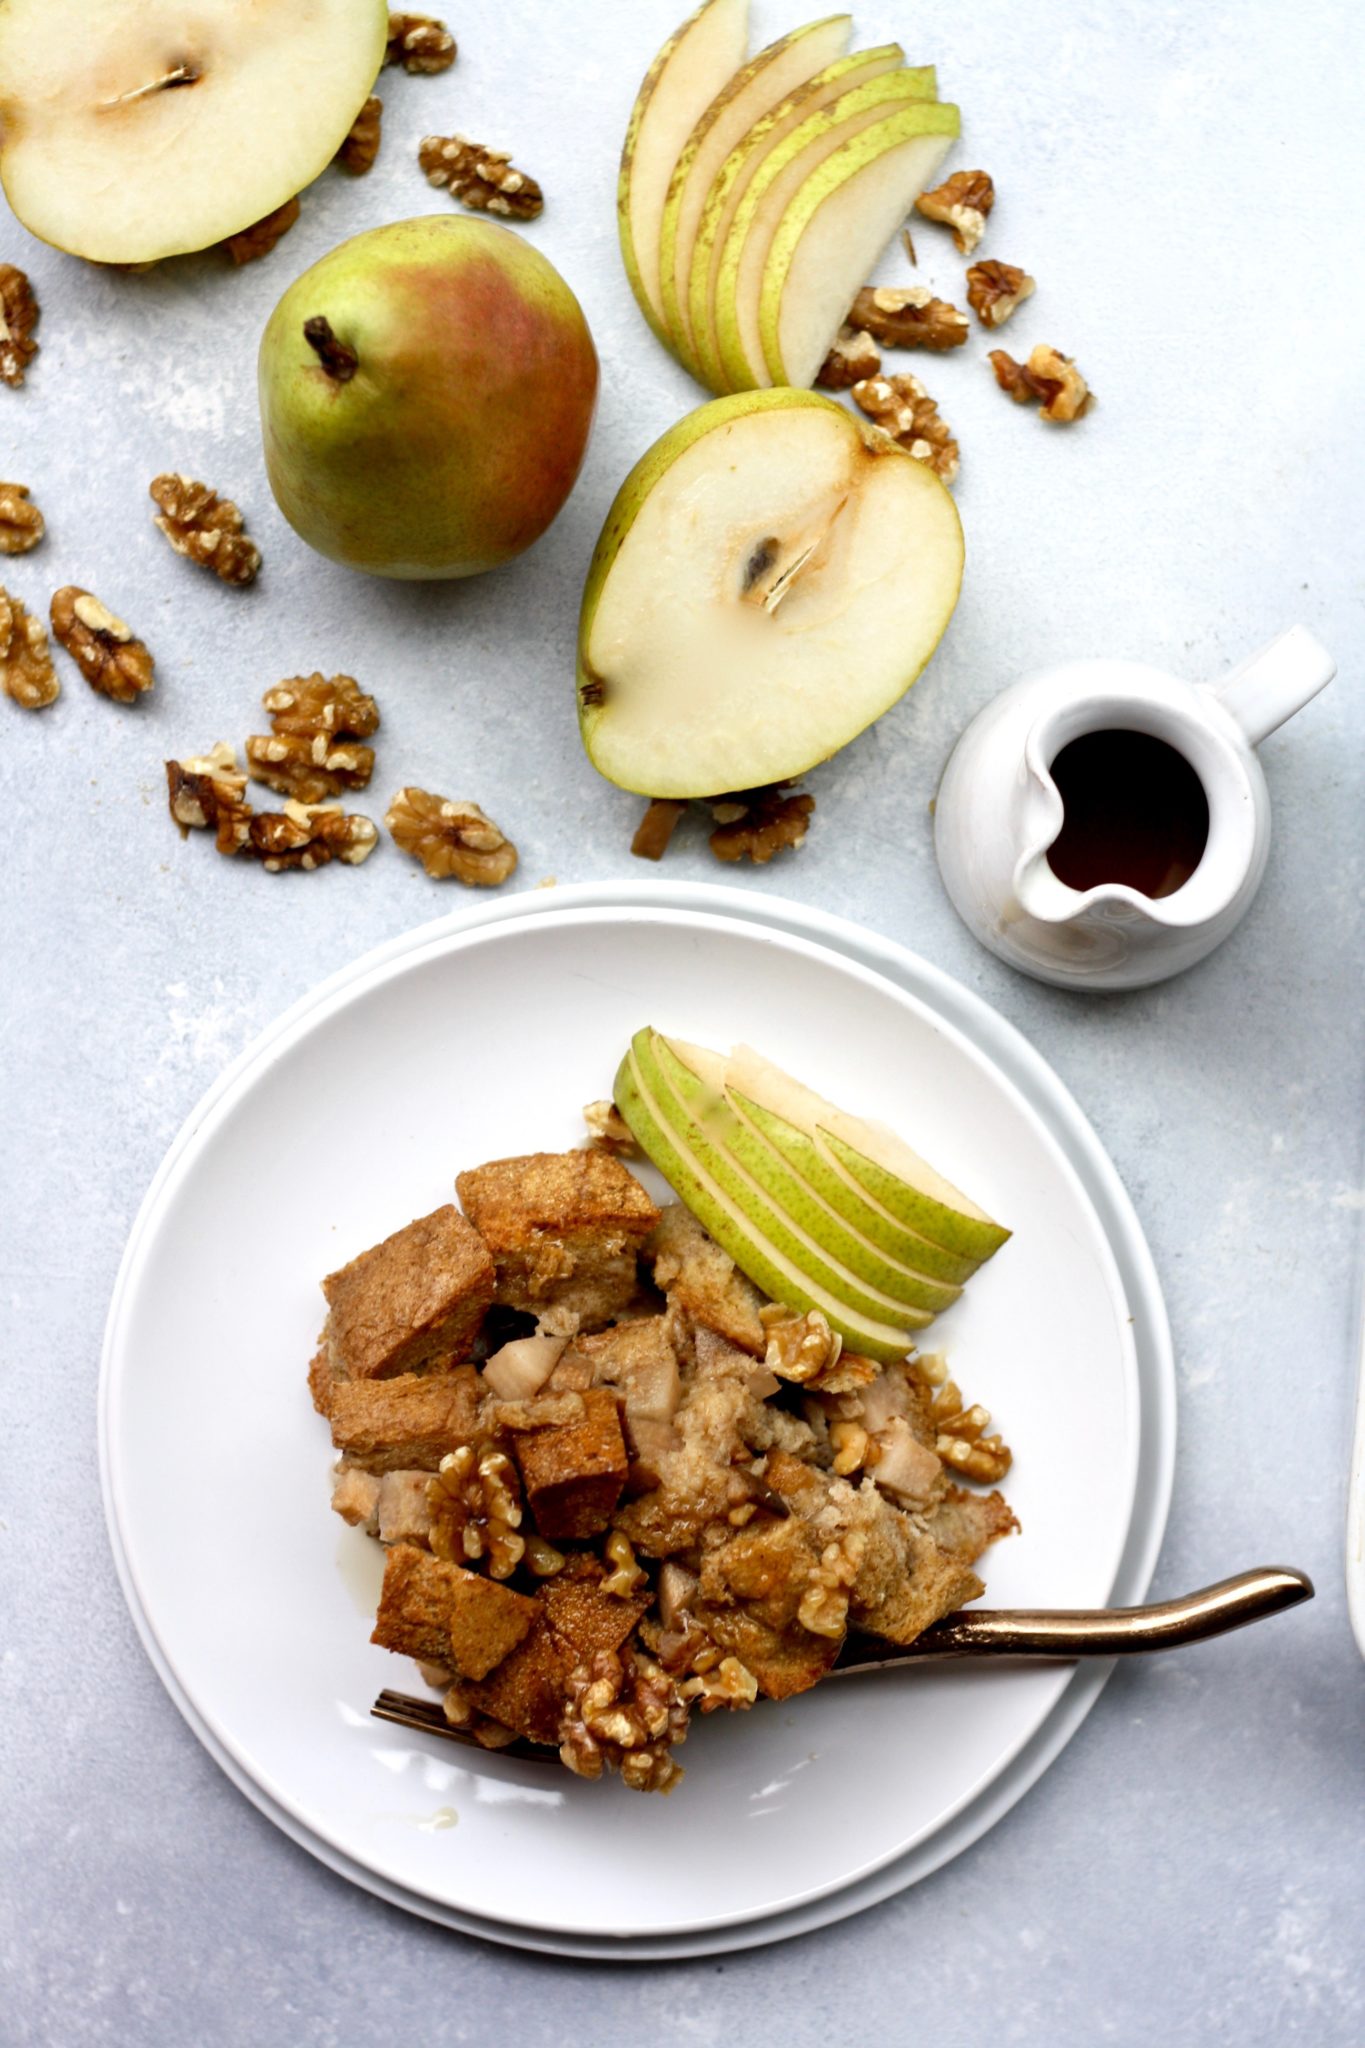 cardamom & cinnamon pear baked french toast with walnuts // cait's plate